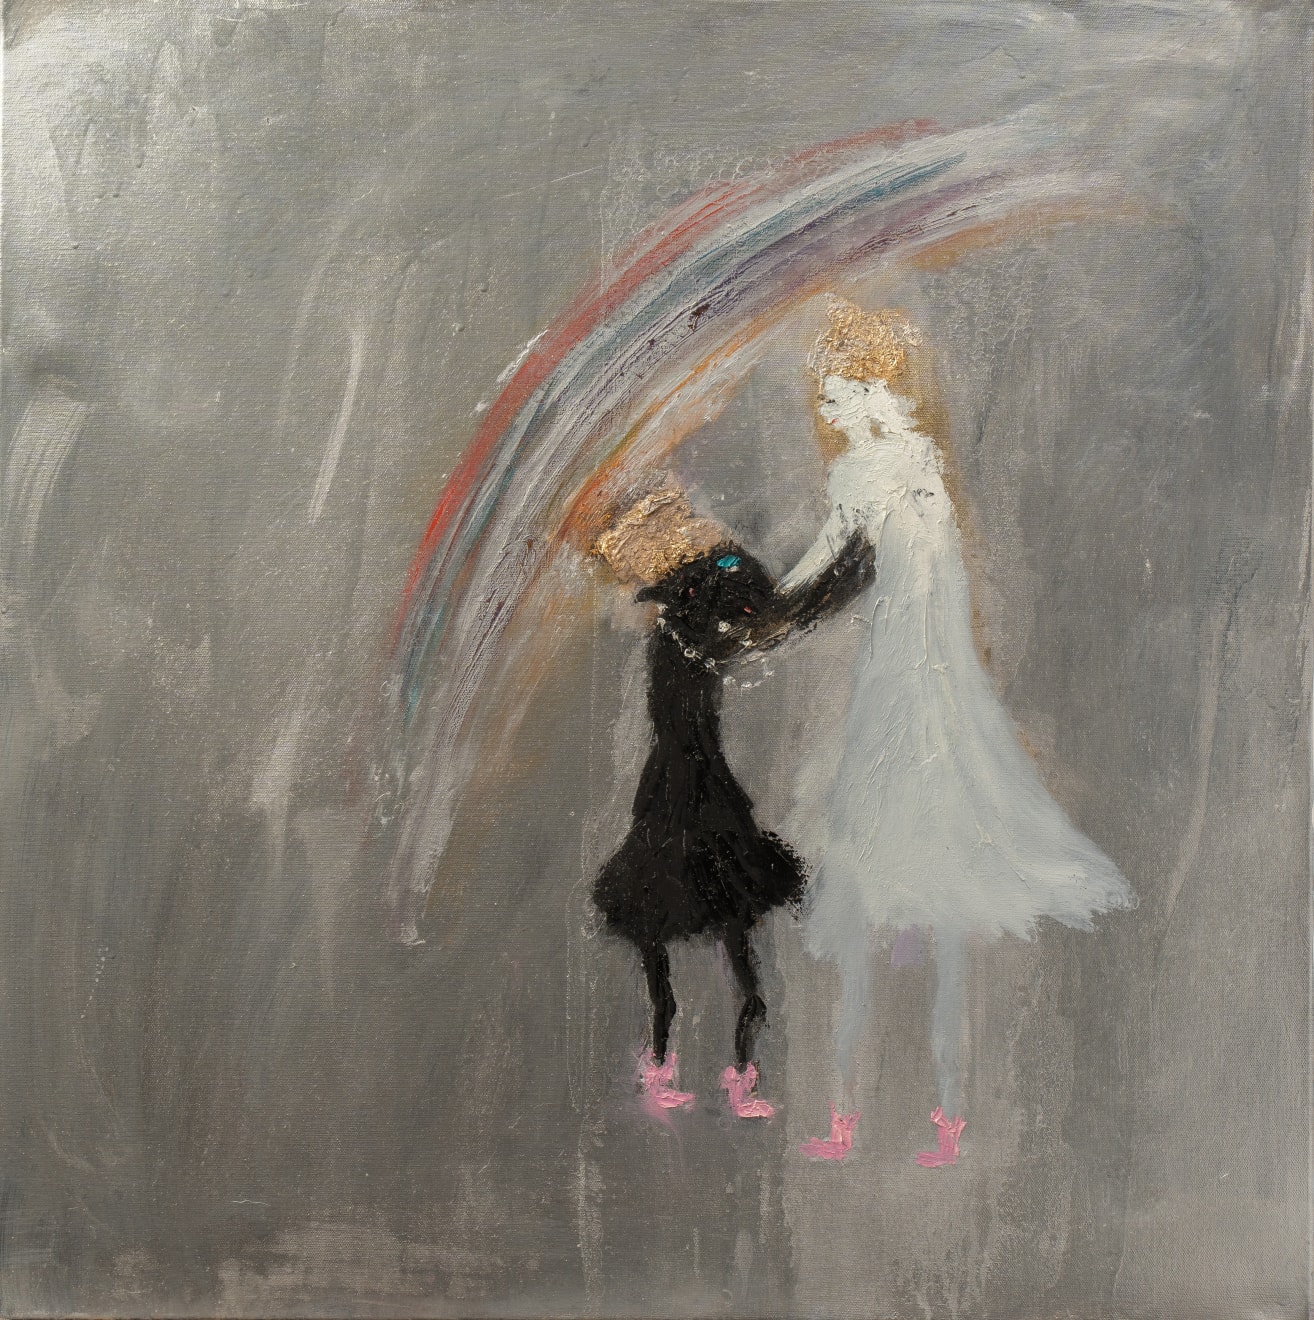 Winifred Wanders The World 04 Oil on Canvas Original 75 x 75 cm $3300